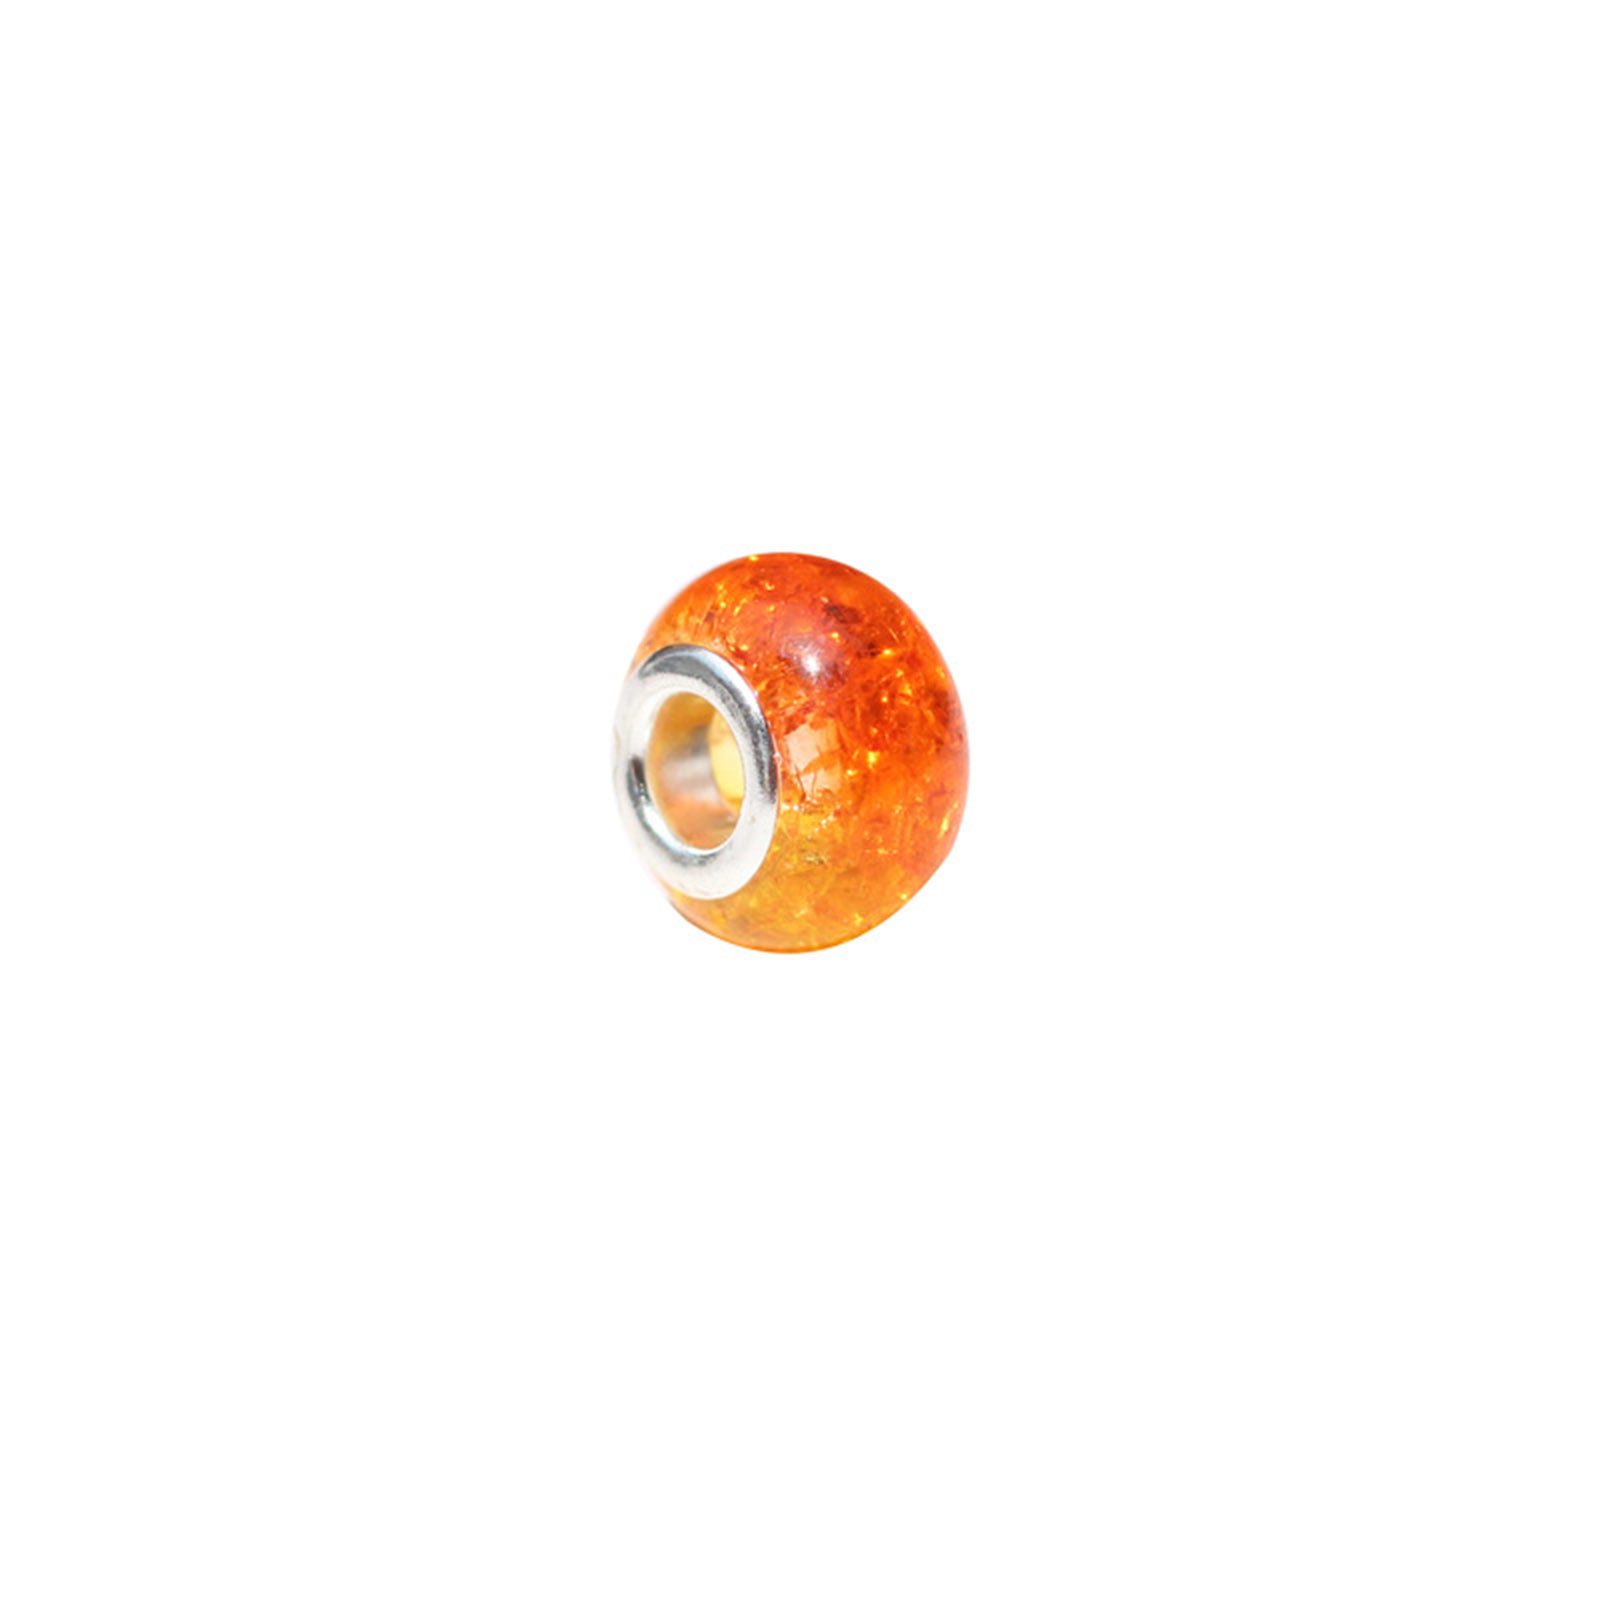 Picture of Resin European Style Large Hole Charm Beads Yellow & Orange Round Crack Gradient Color 14mm Dia., Hole: Approx 5mm, 20 PCs